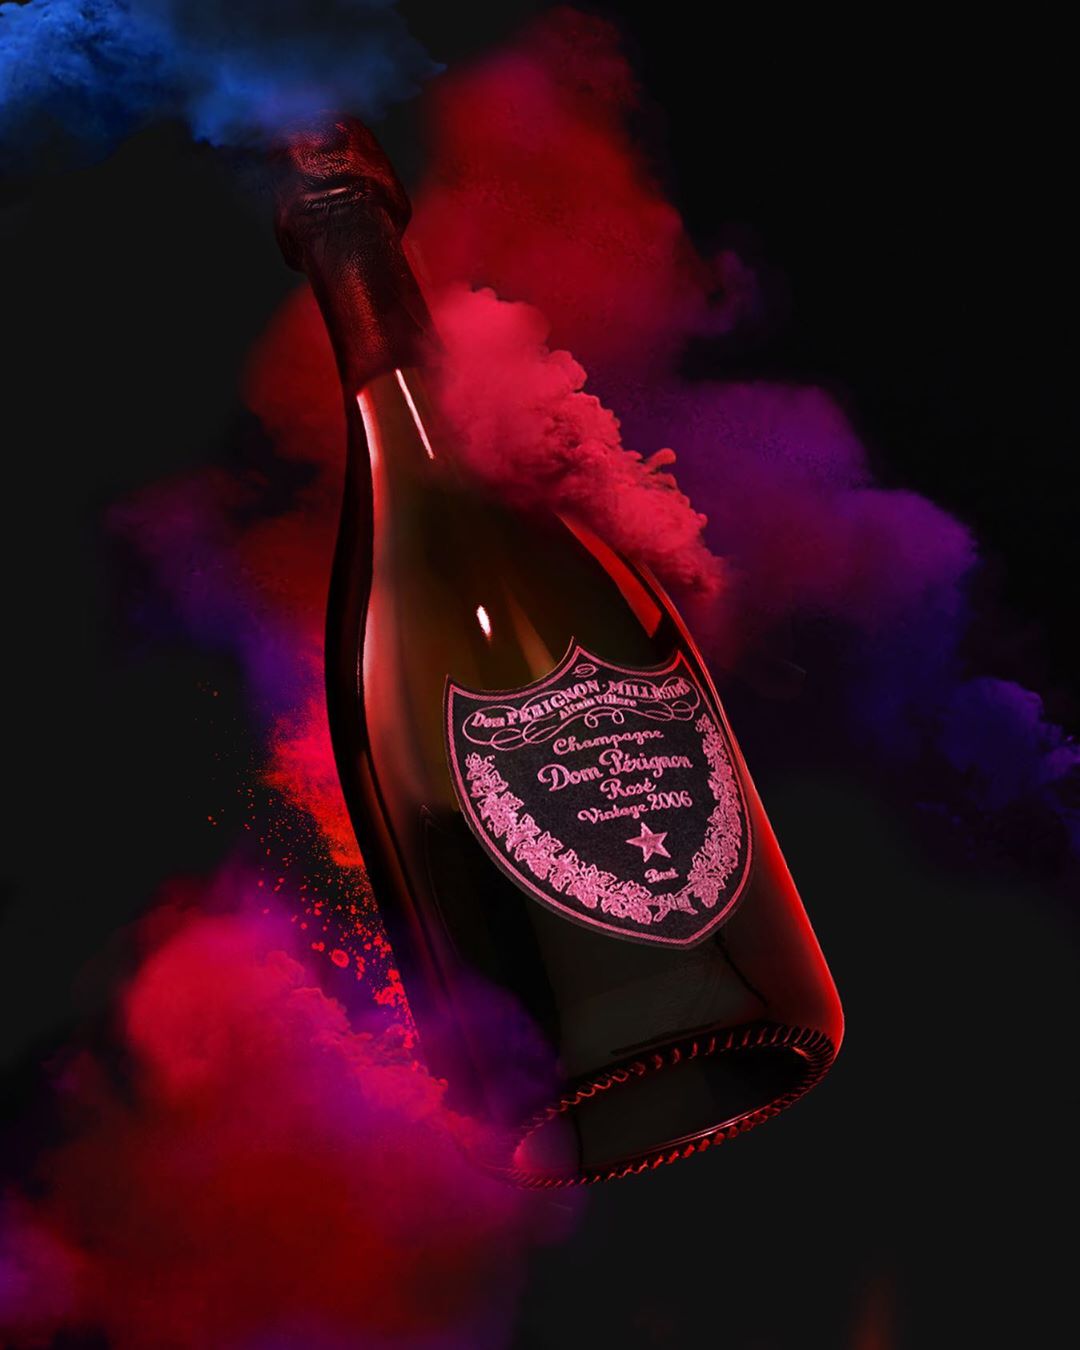 Is Dom Pérignon Worth It? We Tried The Most Expensive Champagne!